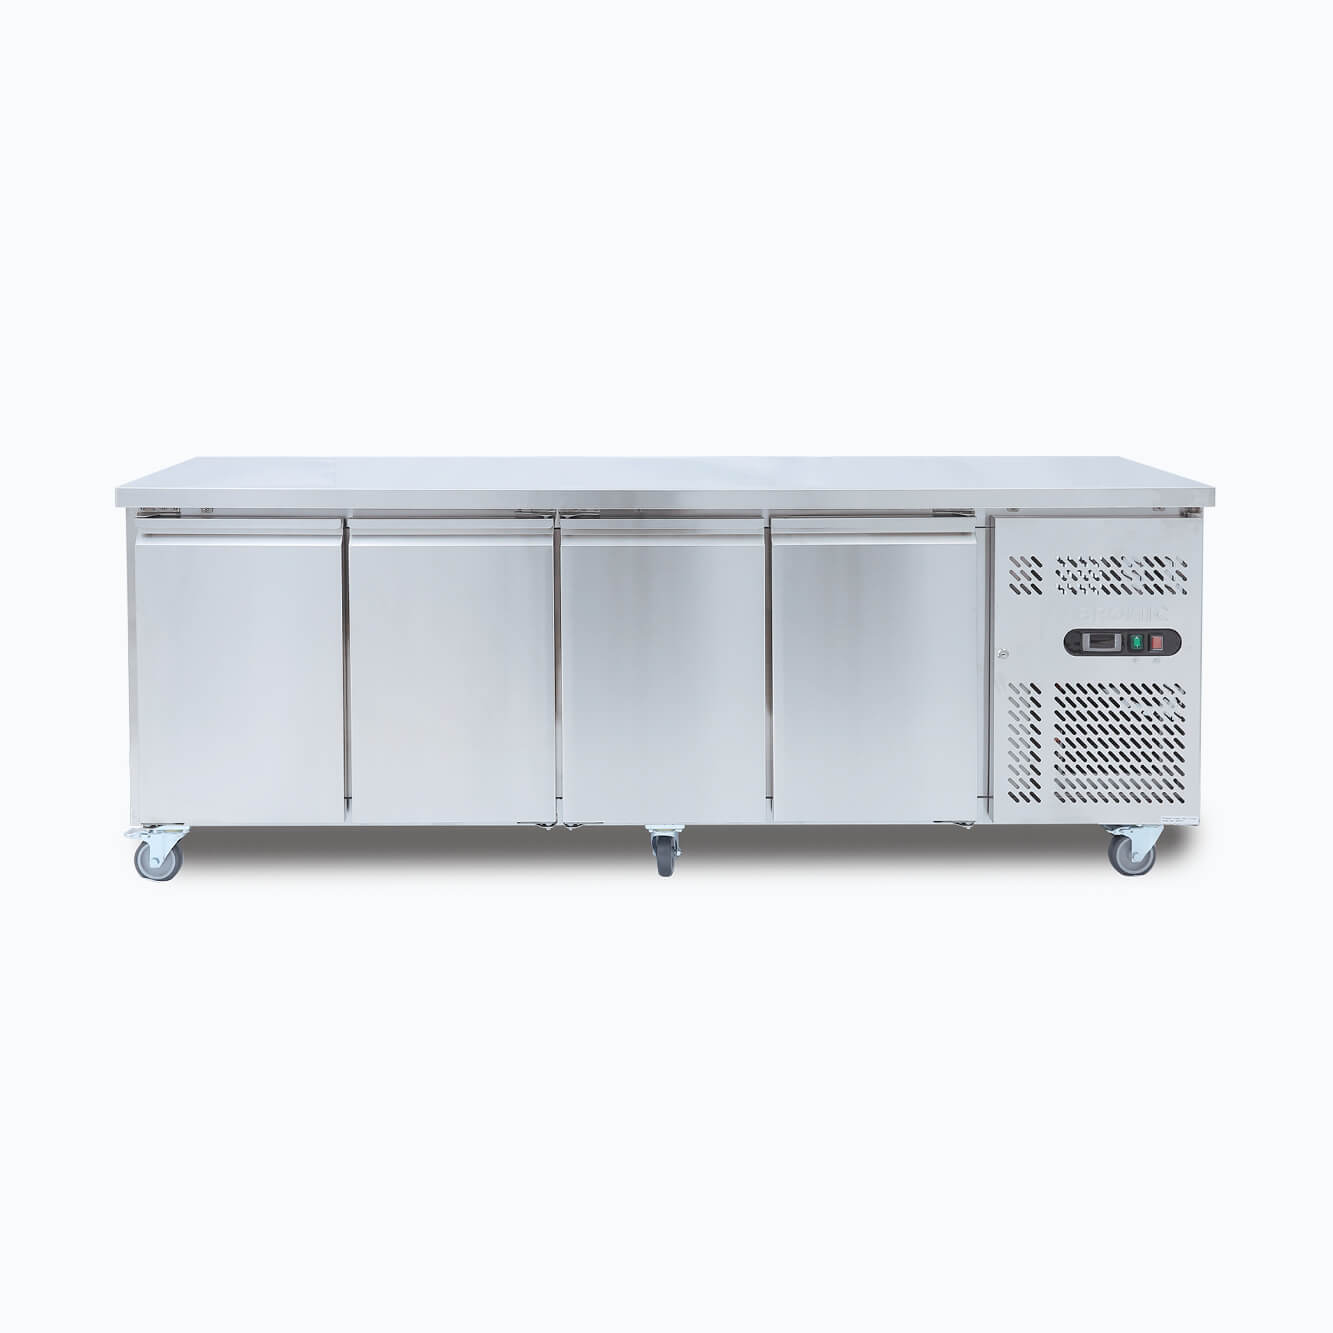 Image of 553L stainless steel under bench storage freezer with four hinged doors, front view.